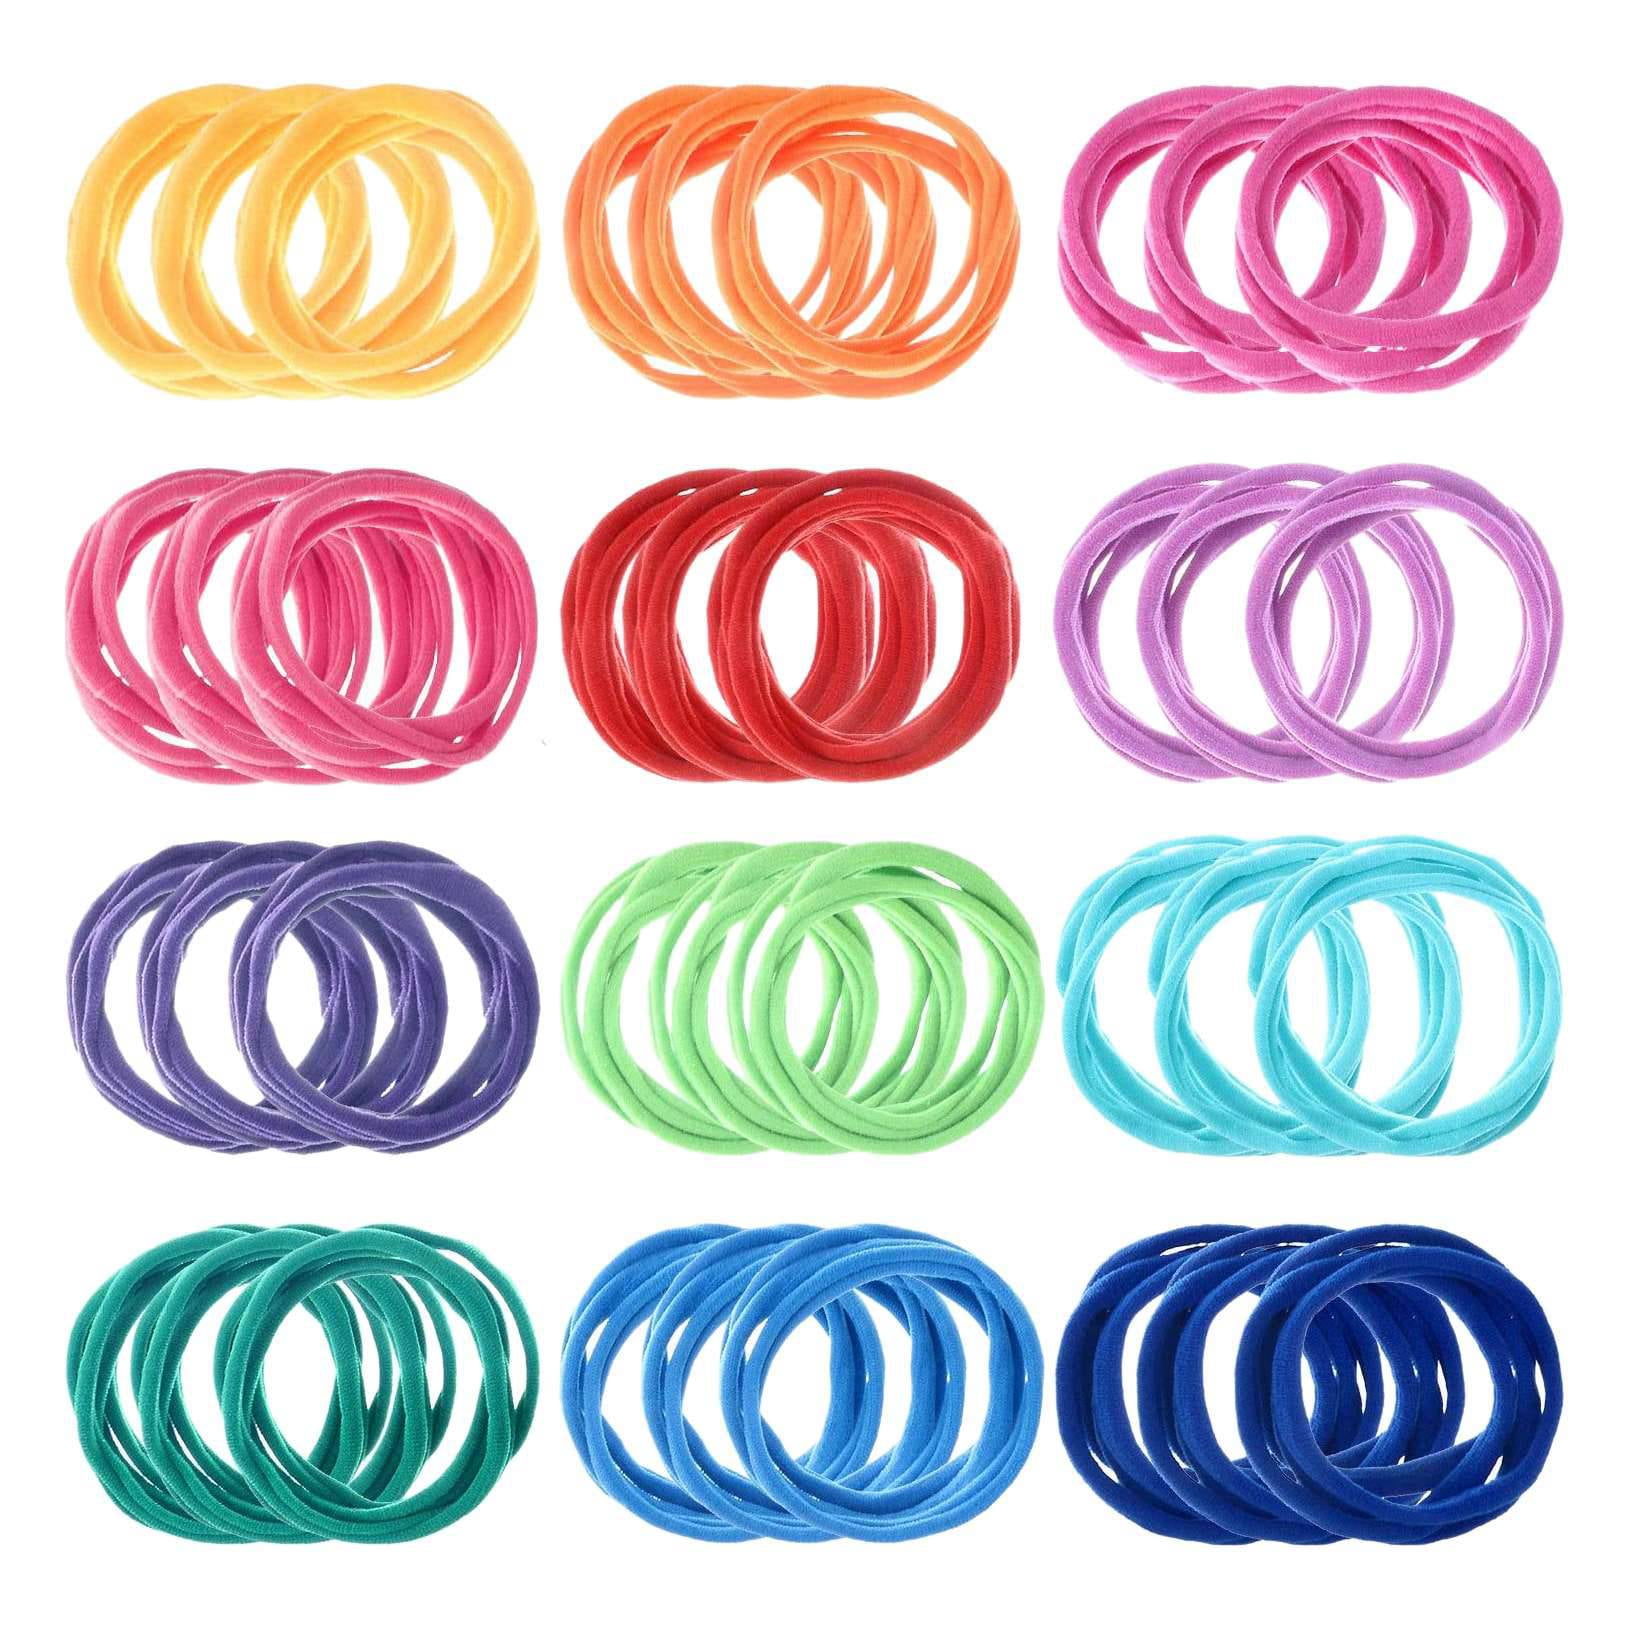 192 Pcs 7 Inches Potholder Loops Weaving Loom Loops Weaving Craft Loops  with 12 Colors for DIY Crafts Supplies A 